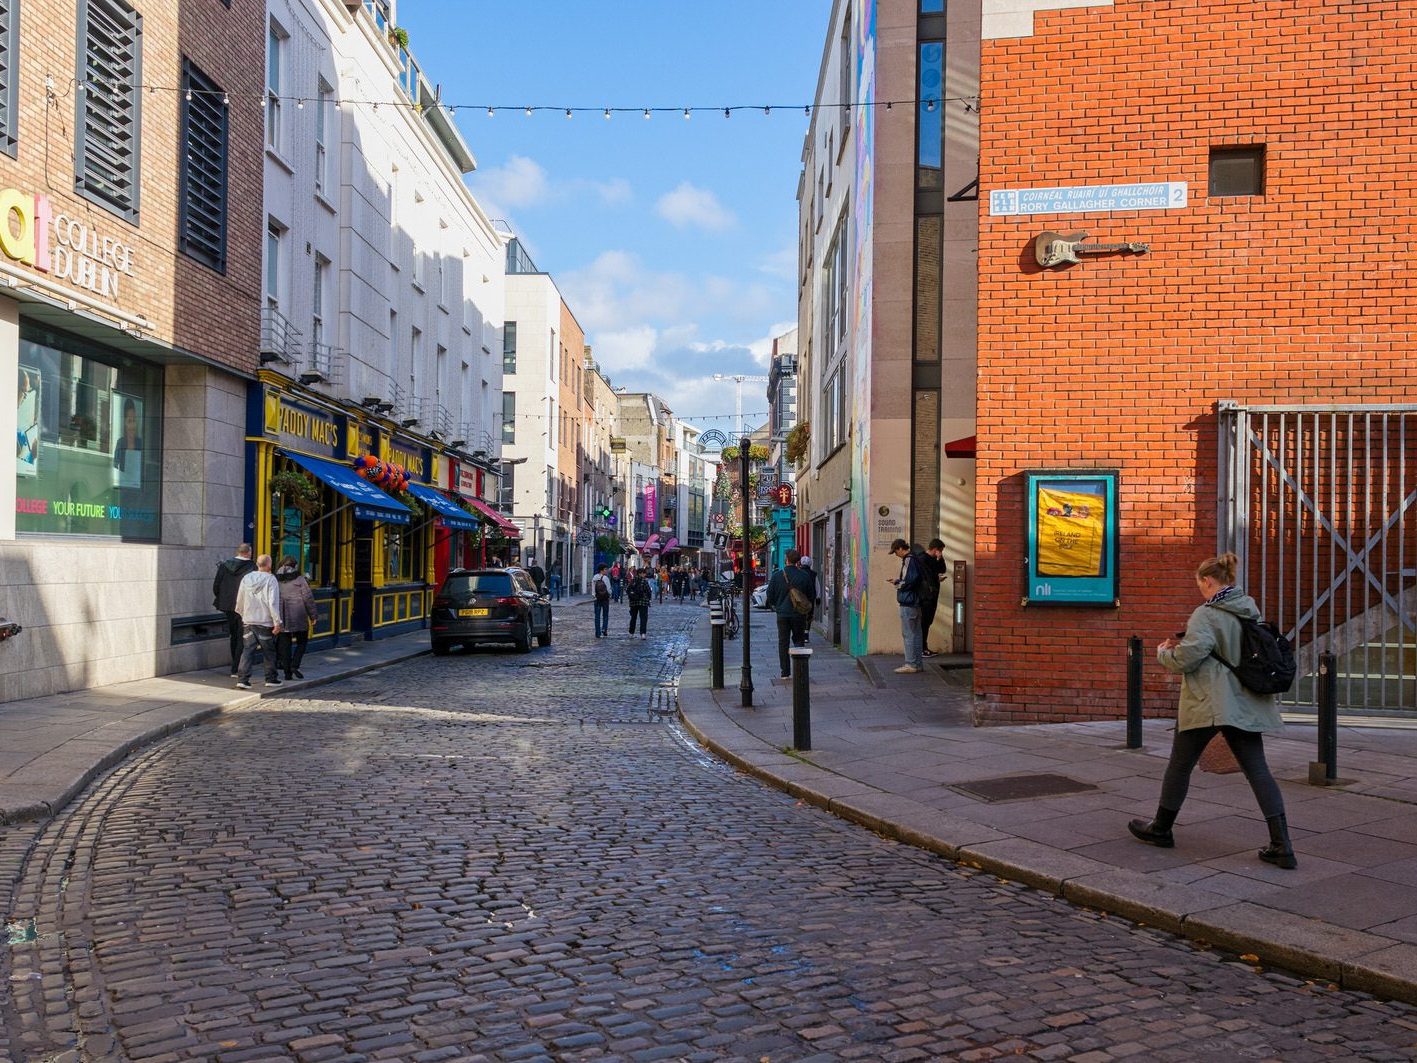 ESSEX STREET AND NEARBY AND THE ELEPHANT STORY [TEMPLE BAR AREA OF DUBLIN] 009